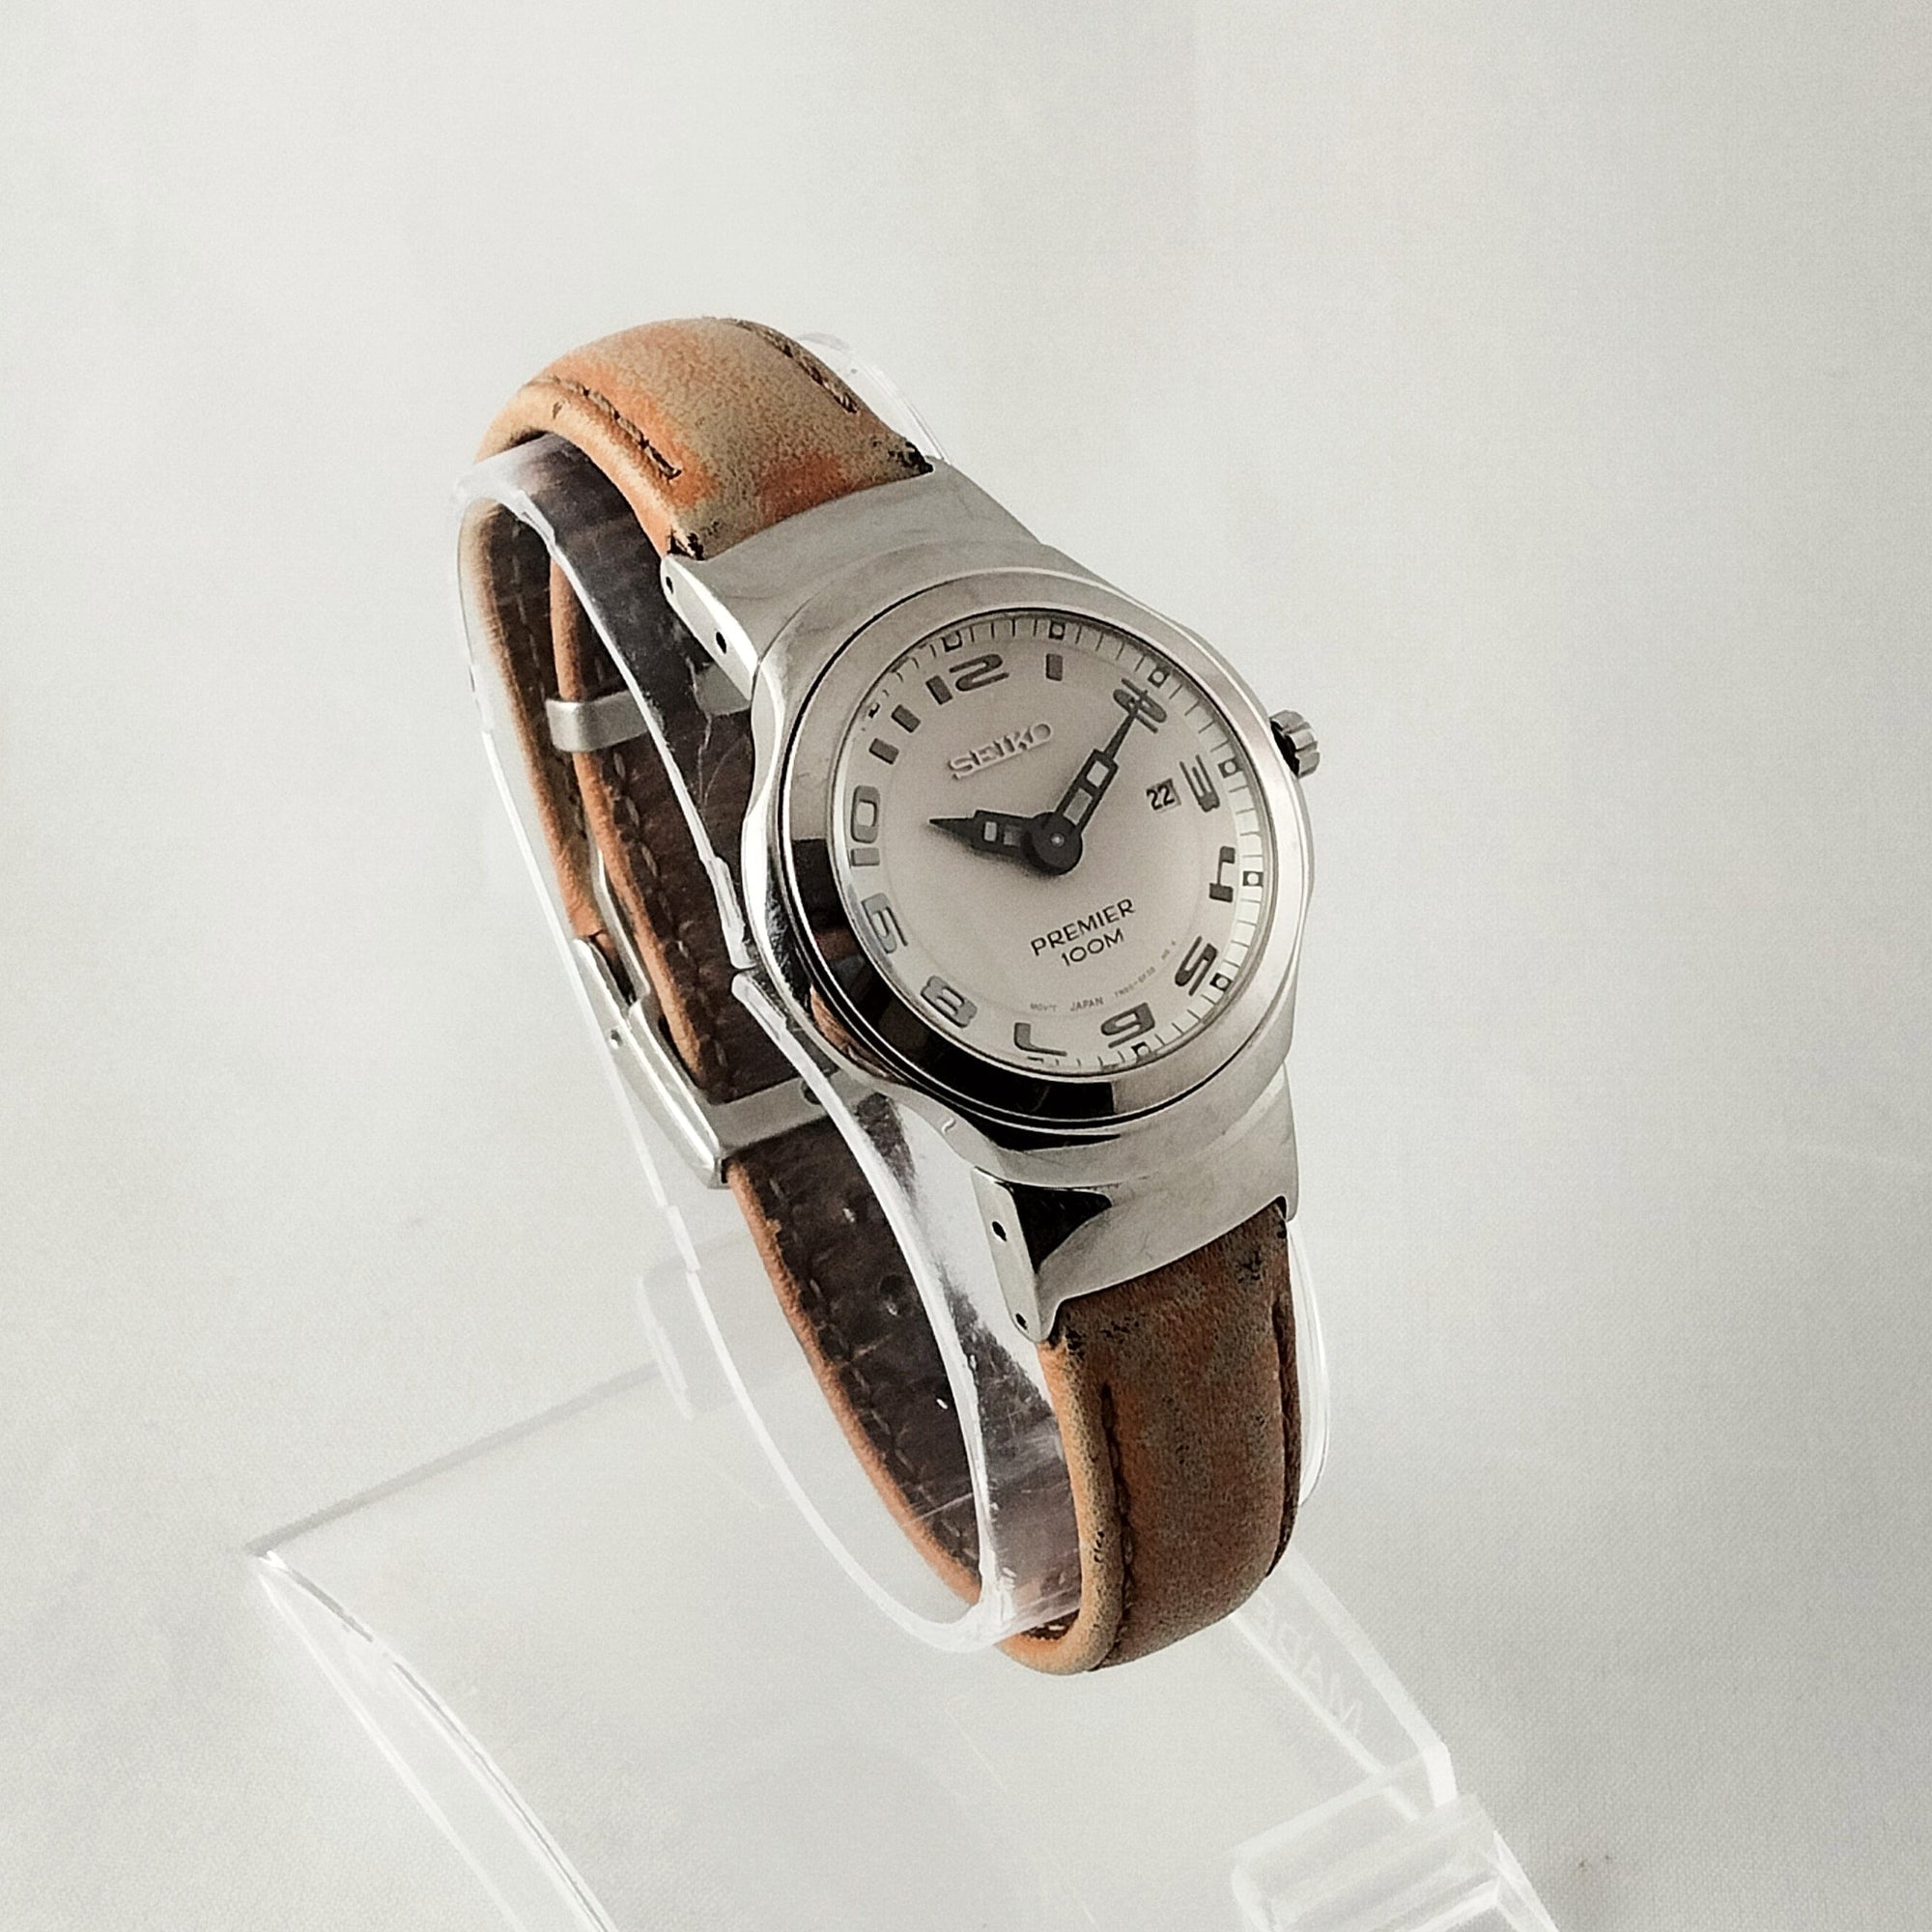 I Like Mikes Mid Century Modern Watches Seiko Stainless Steel Men's Watch, Fish-Eye Lens Look, Brown Leather Strap